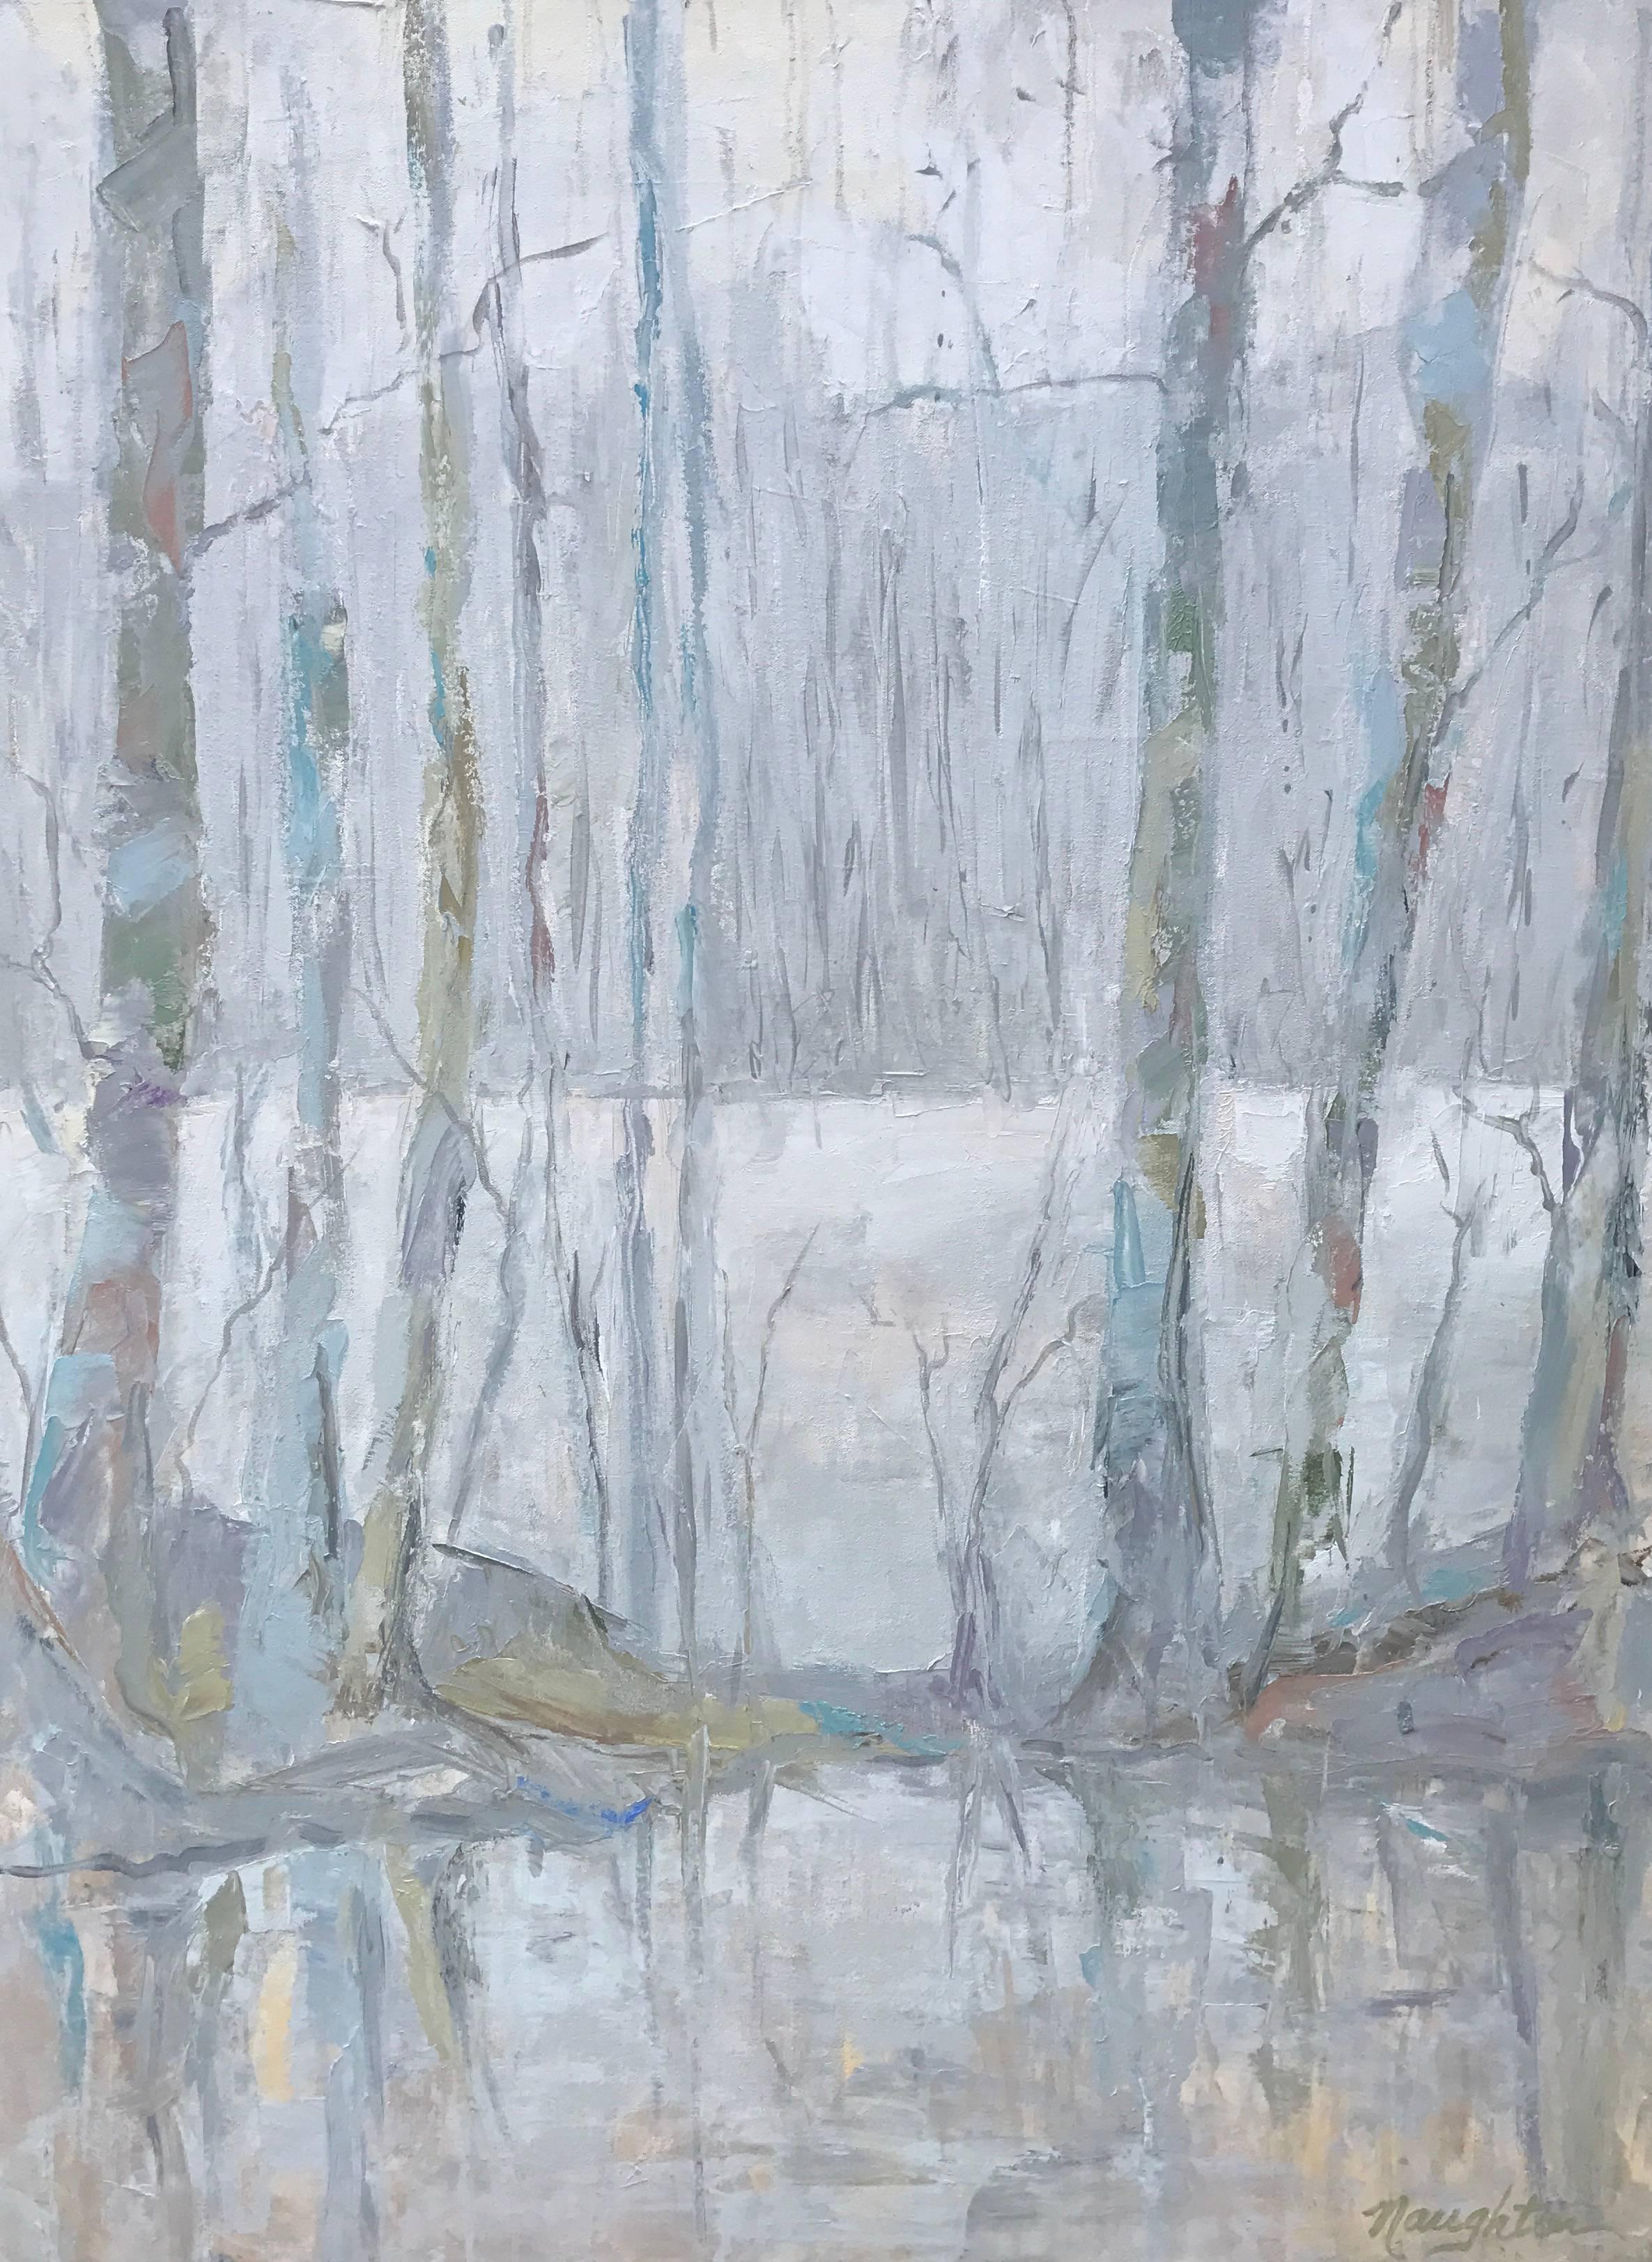 This beautiful forest scene was executed perfectly by American artist Maureen Naughton.  It depicts birch trees by the lakeside.  With a soft palette and rich texture, this piece will surely catch your eye.  The reflection in the water and the